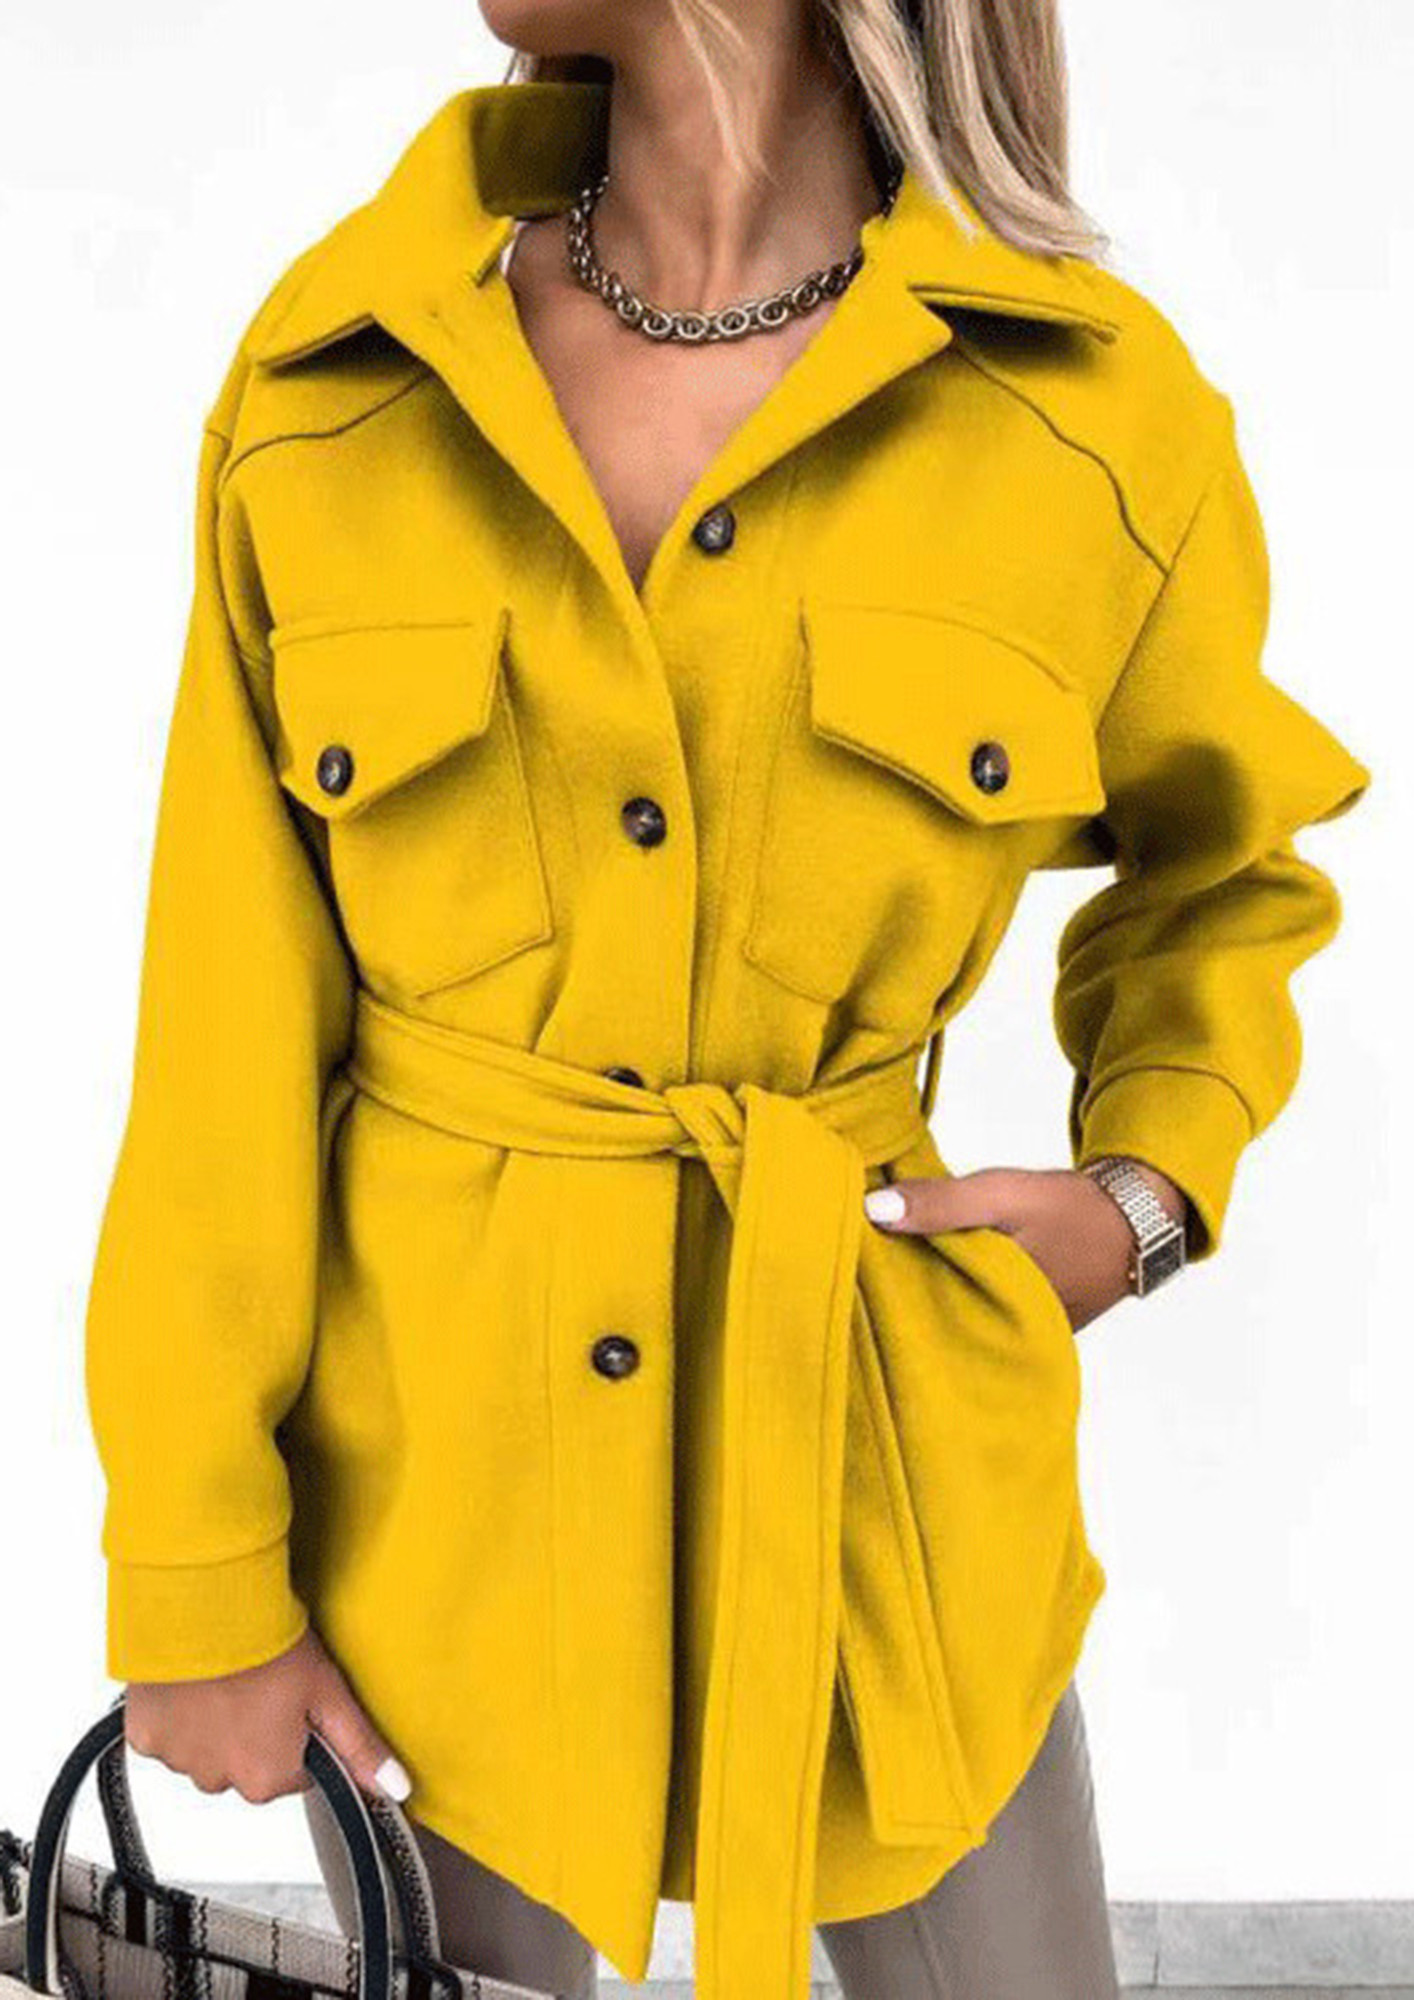 ON THE LONG DAYS LONG YELLOW COAT